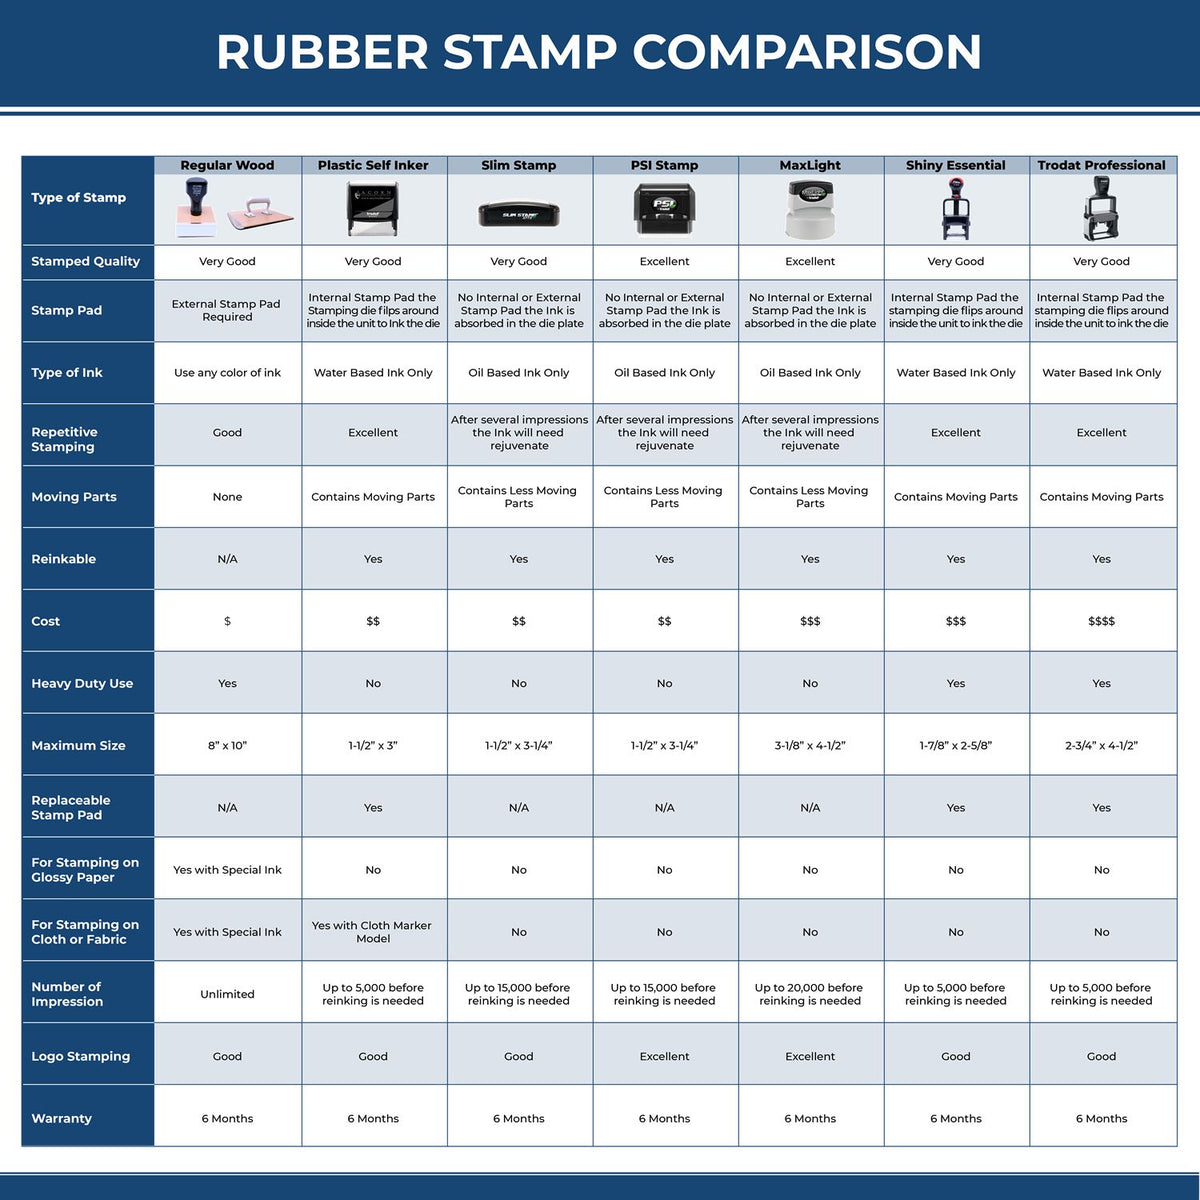 A comparison chart for the different types of mount models available for the MaxLight Premium Pre-Inked North Dakota Rectangular Notarial Stamp.